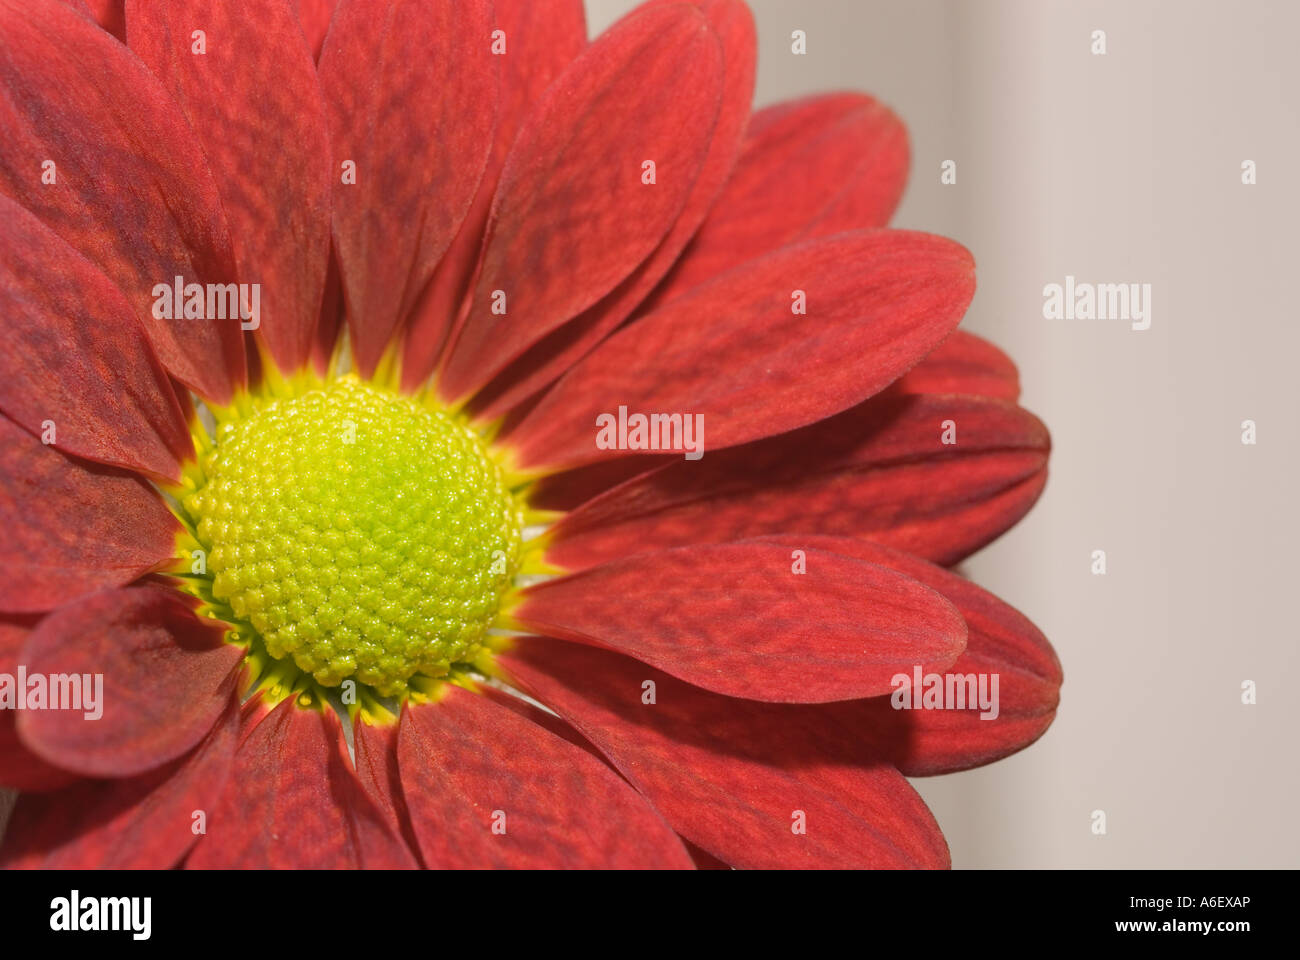 Red Gerbera flower with yellow centre Stock Photo